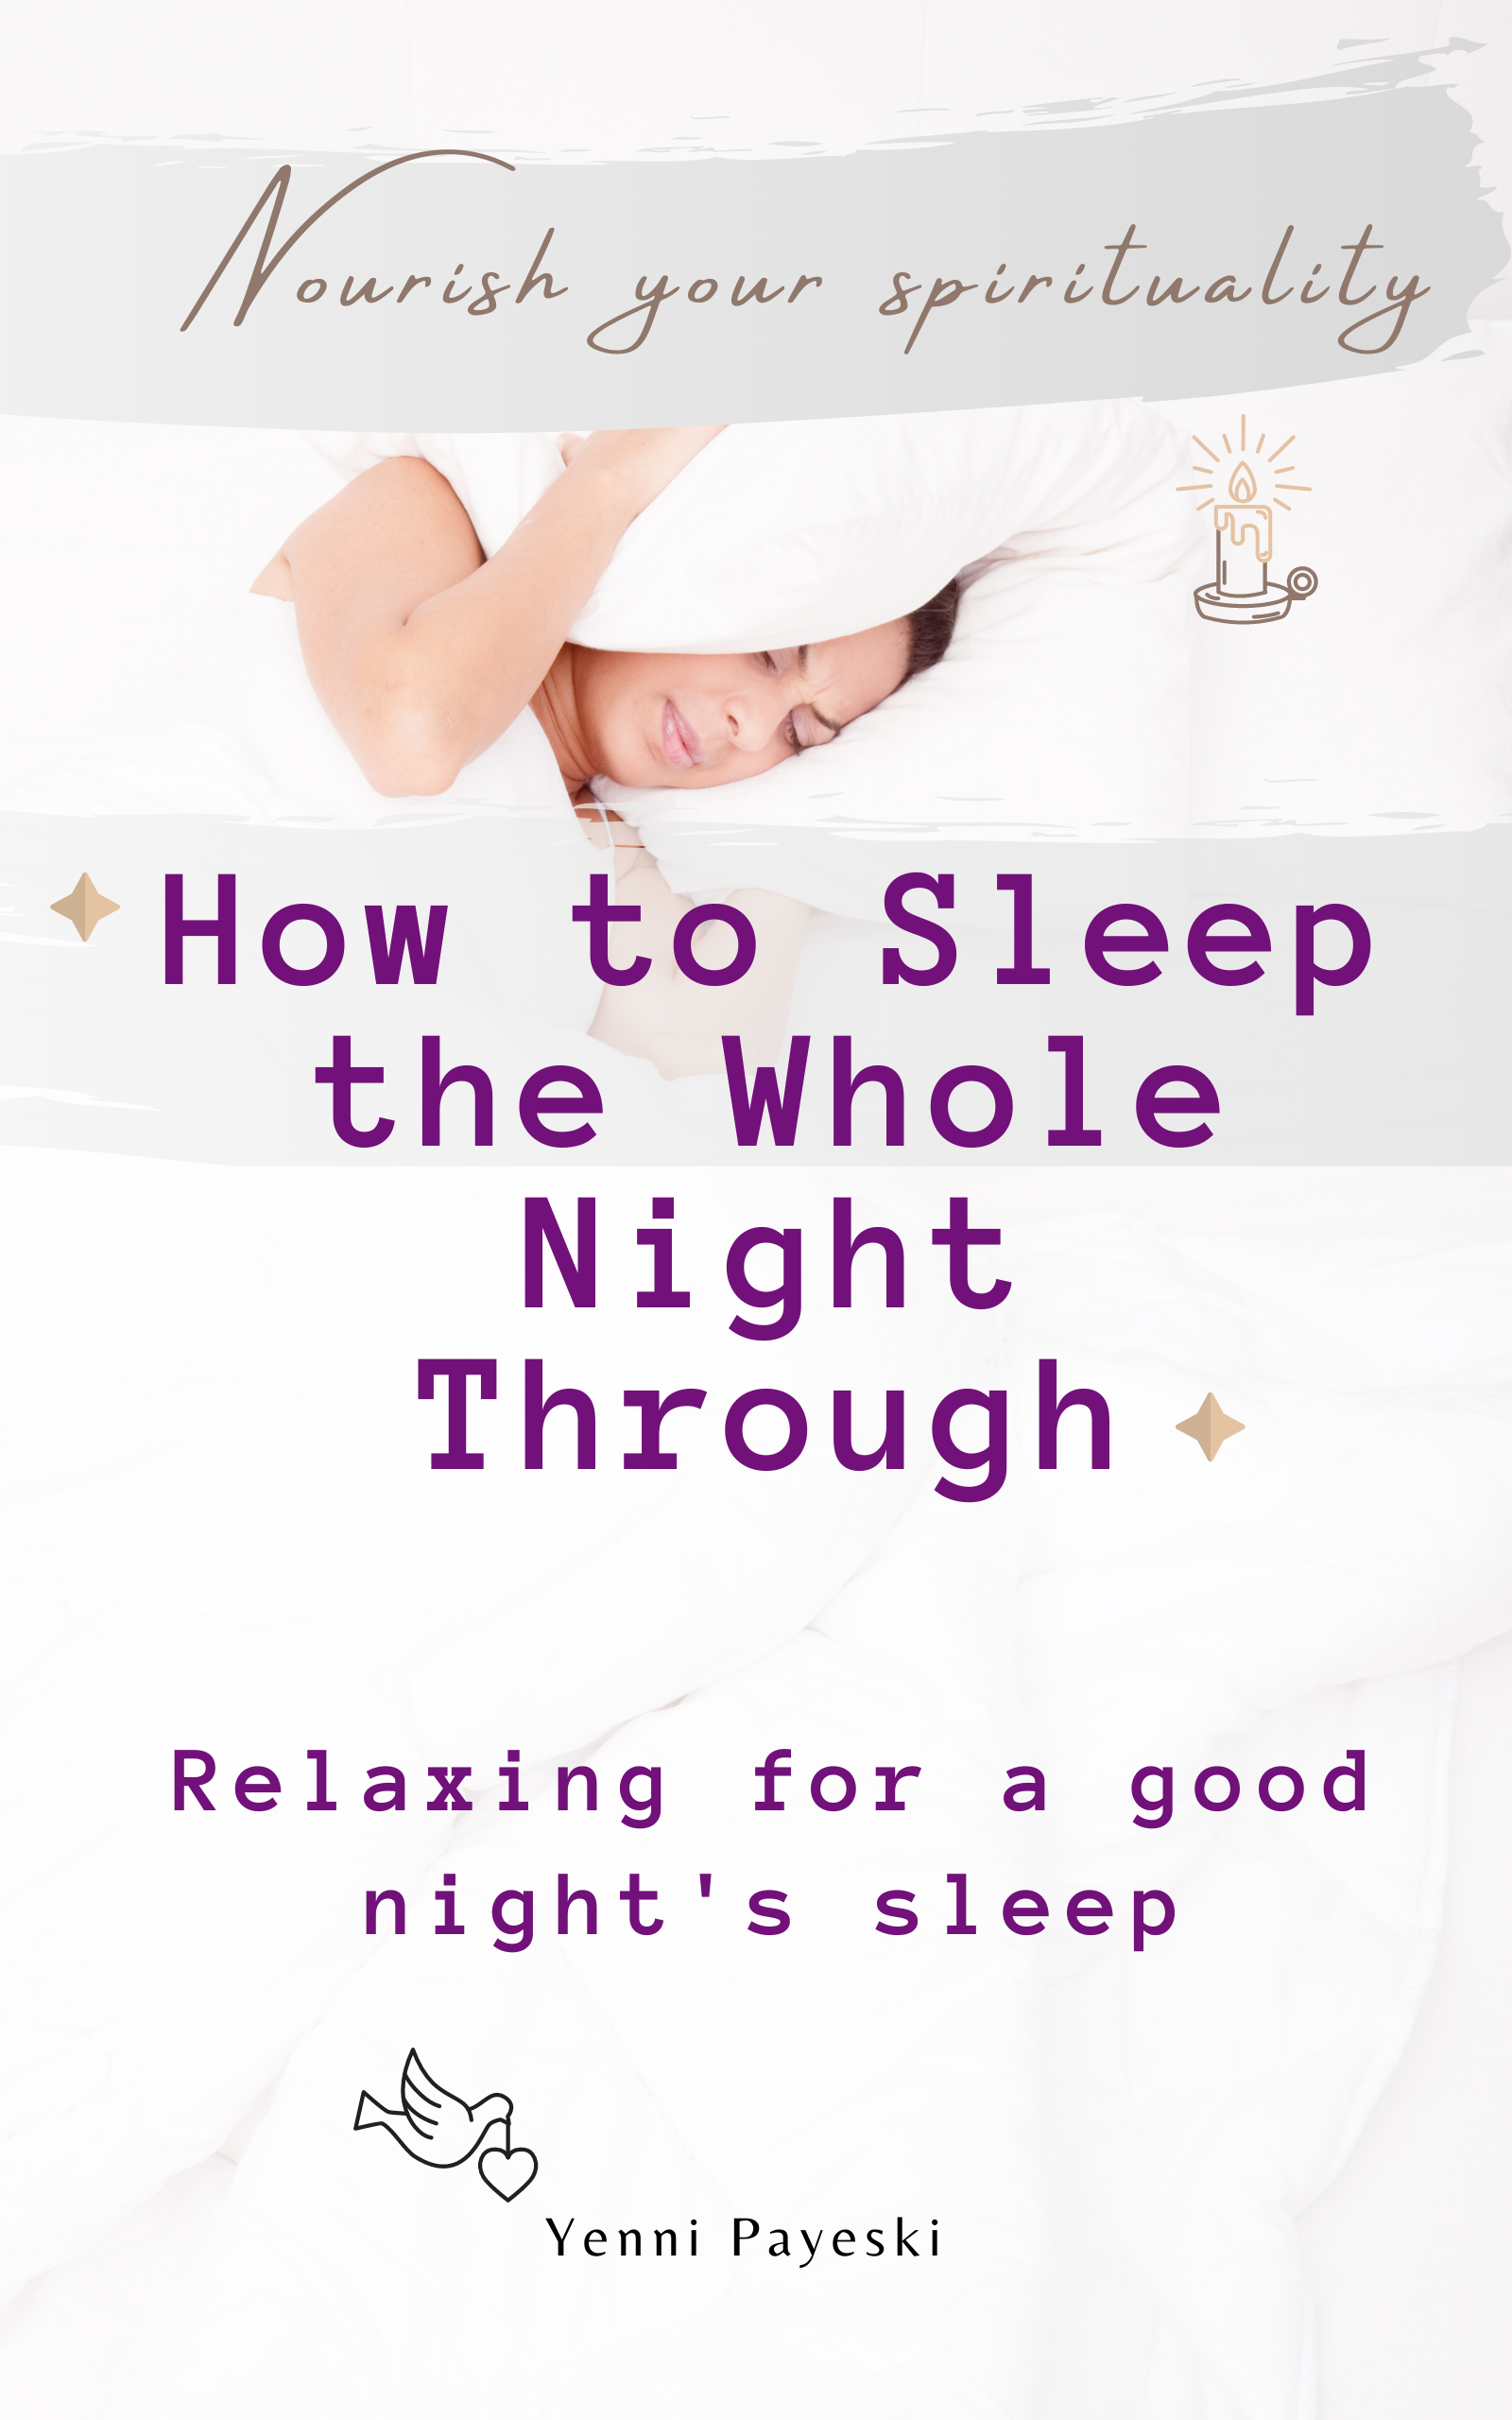 FREE: How to Sleep the Whole Night Through. Relaxing for a good night’s sleep. Nourish your spirituality by Yenni Payeski